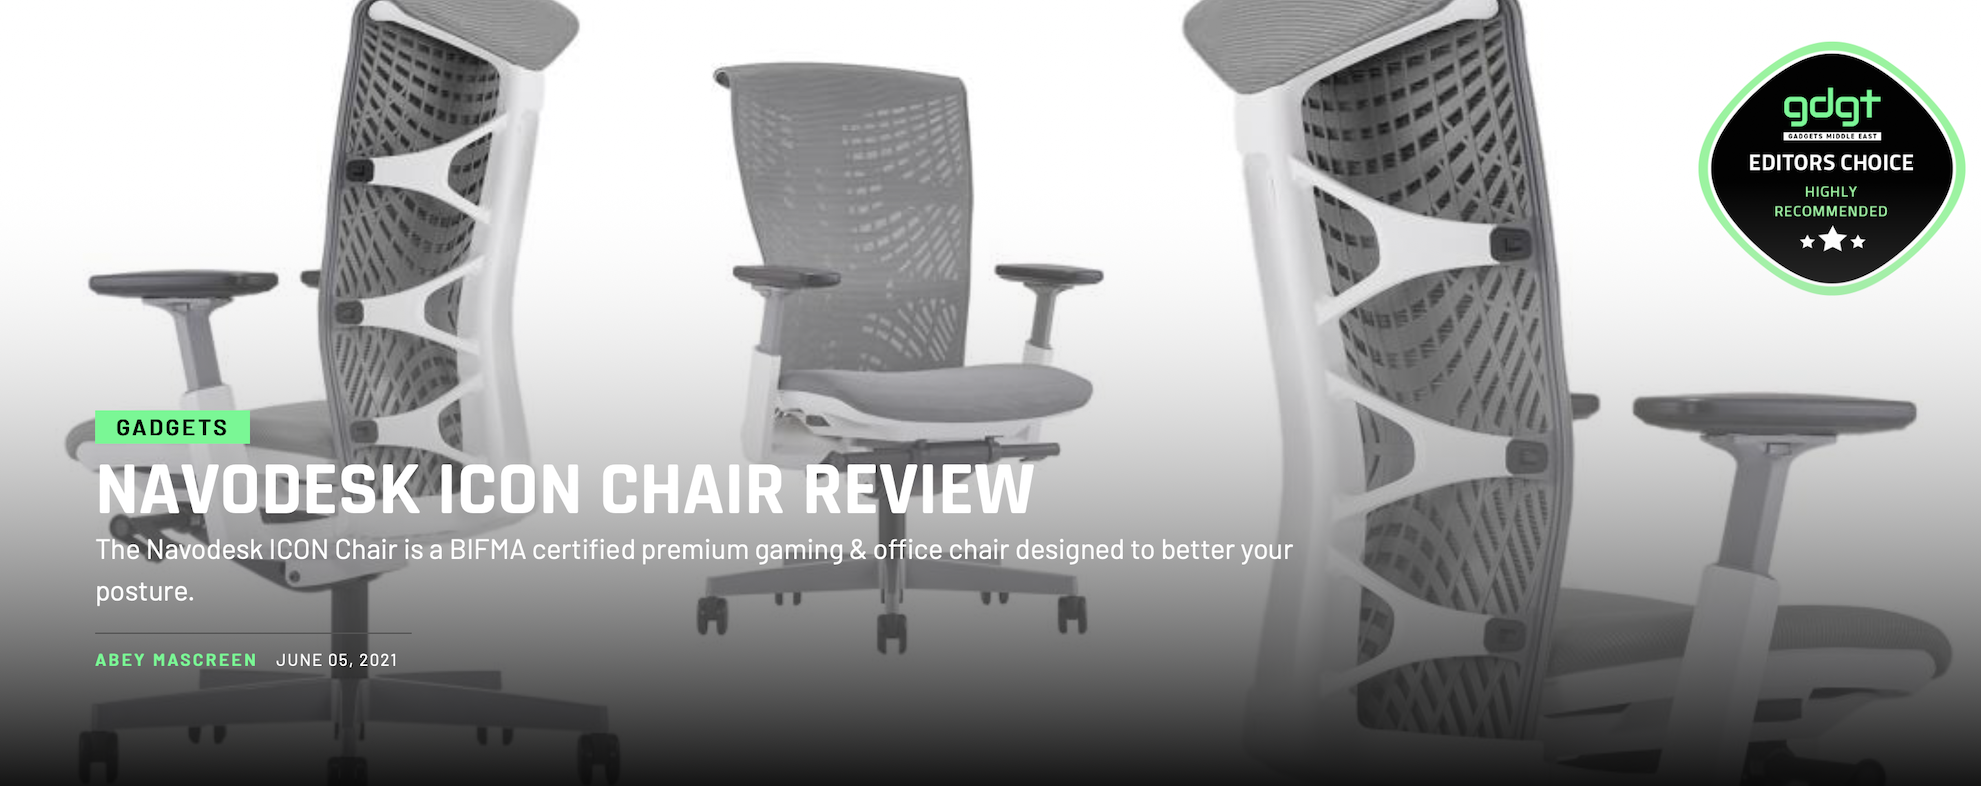 NAVODESK ICON CHAIR REVIEW